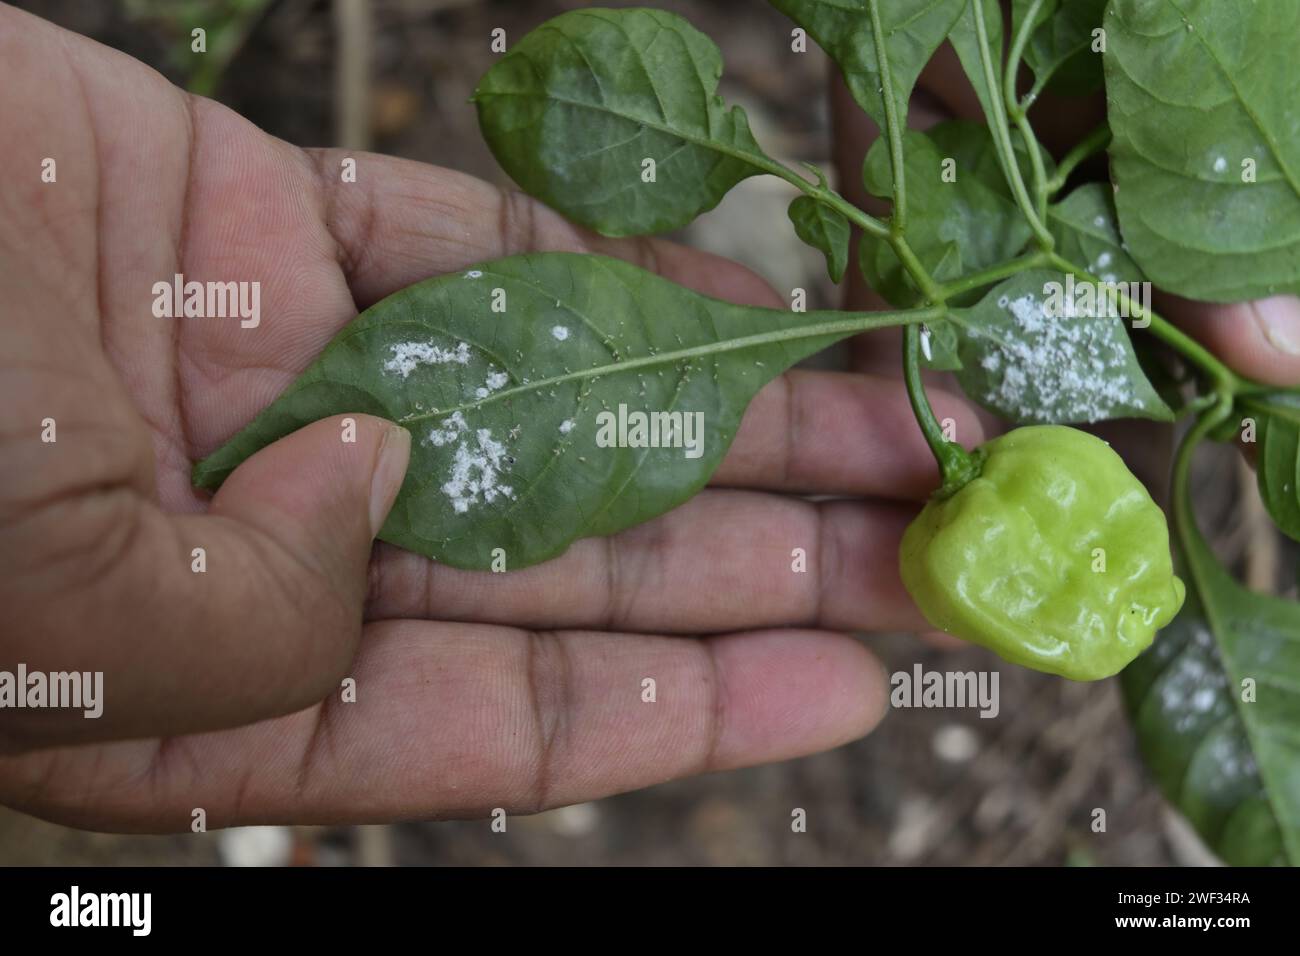 Chili leaves infected with whiteflies are being inspected and held by a farmer in close view. Alongside the infected leaves, a mature chili fruit Stock Photo